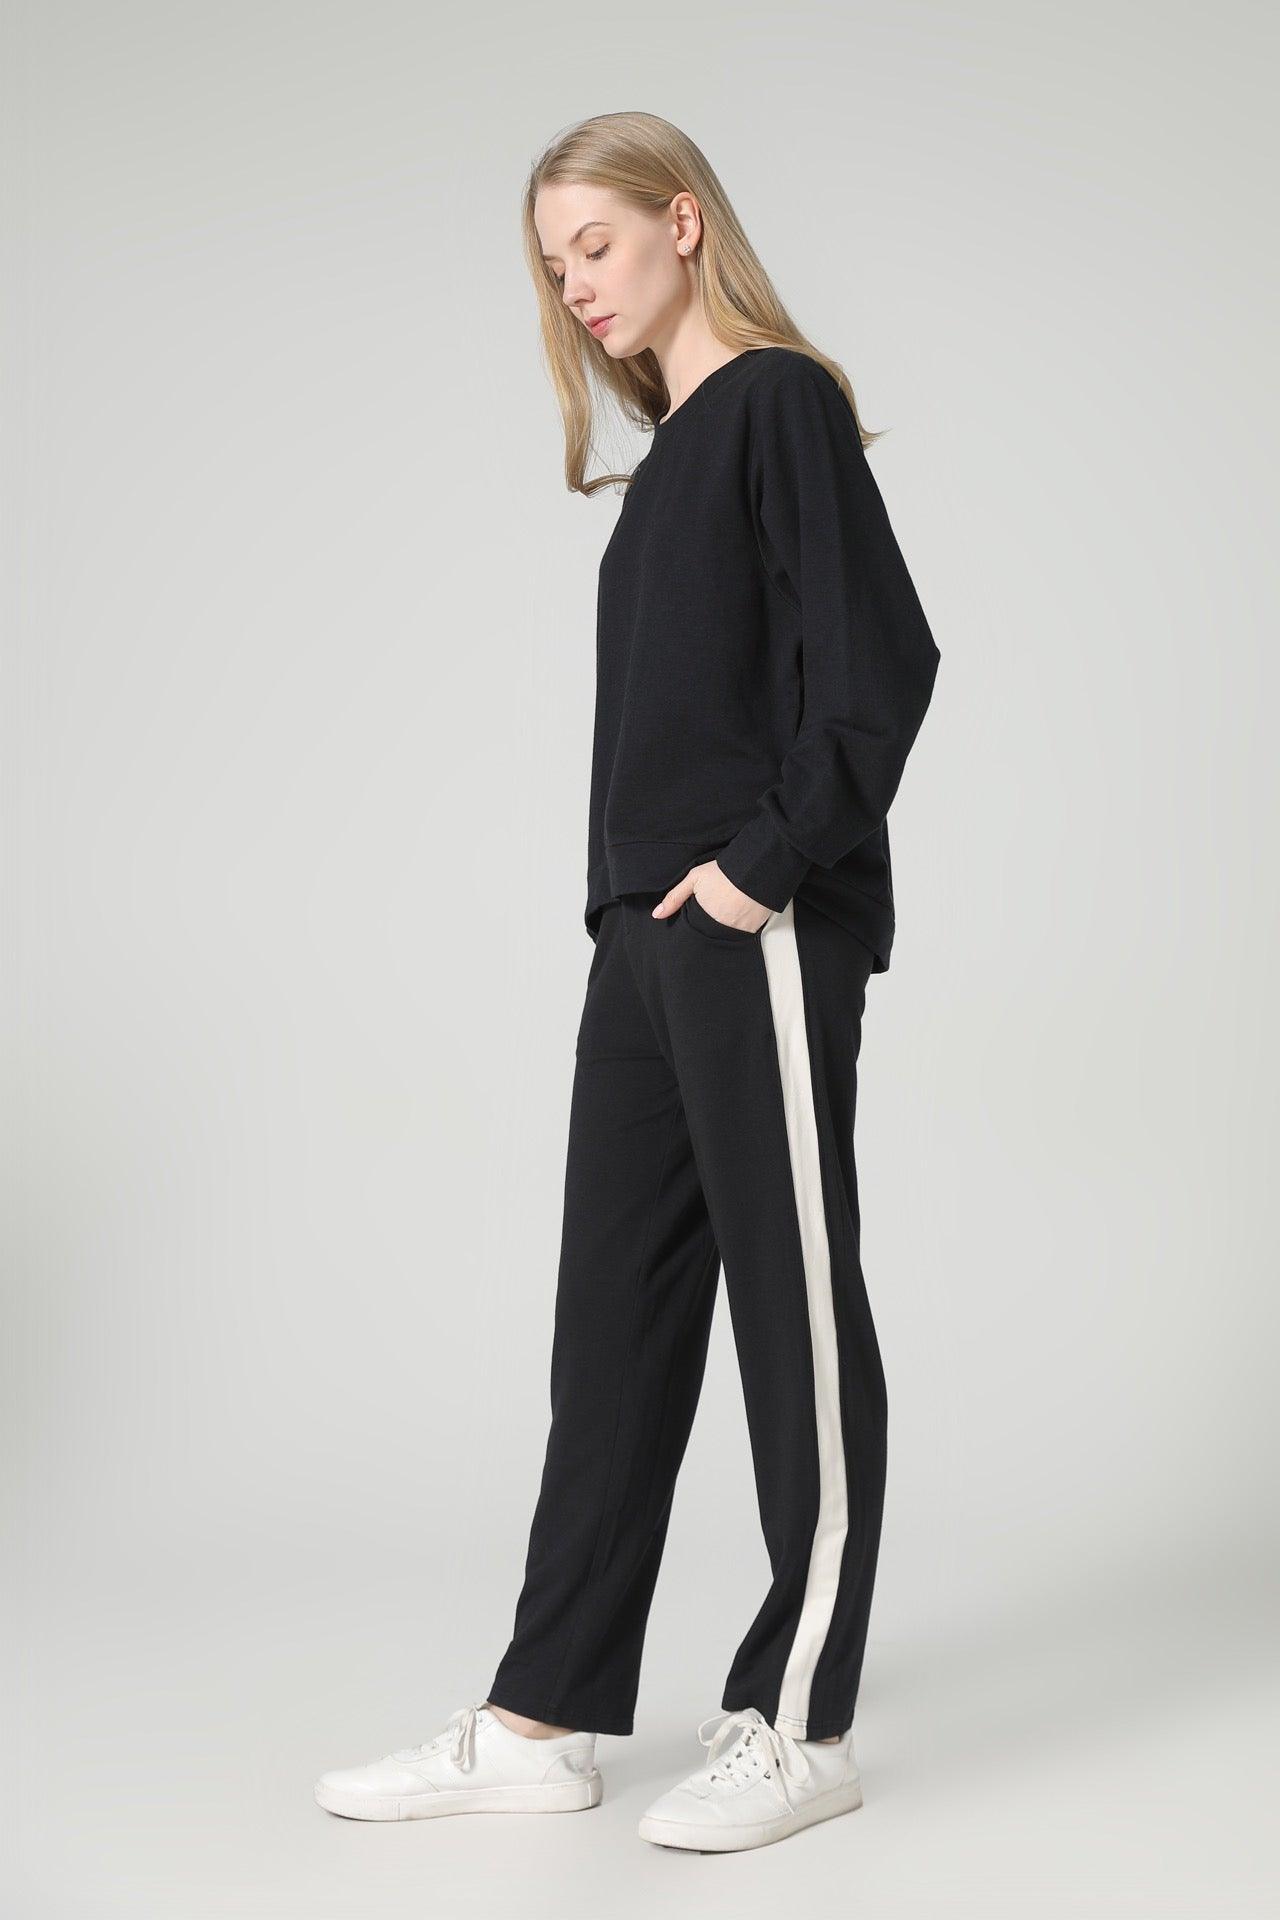 Women's Bamboo Side Lined Sweatpants - NOT LABELED